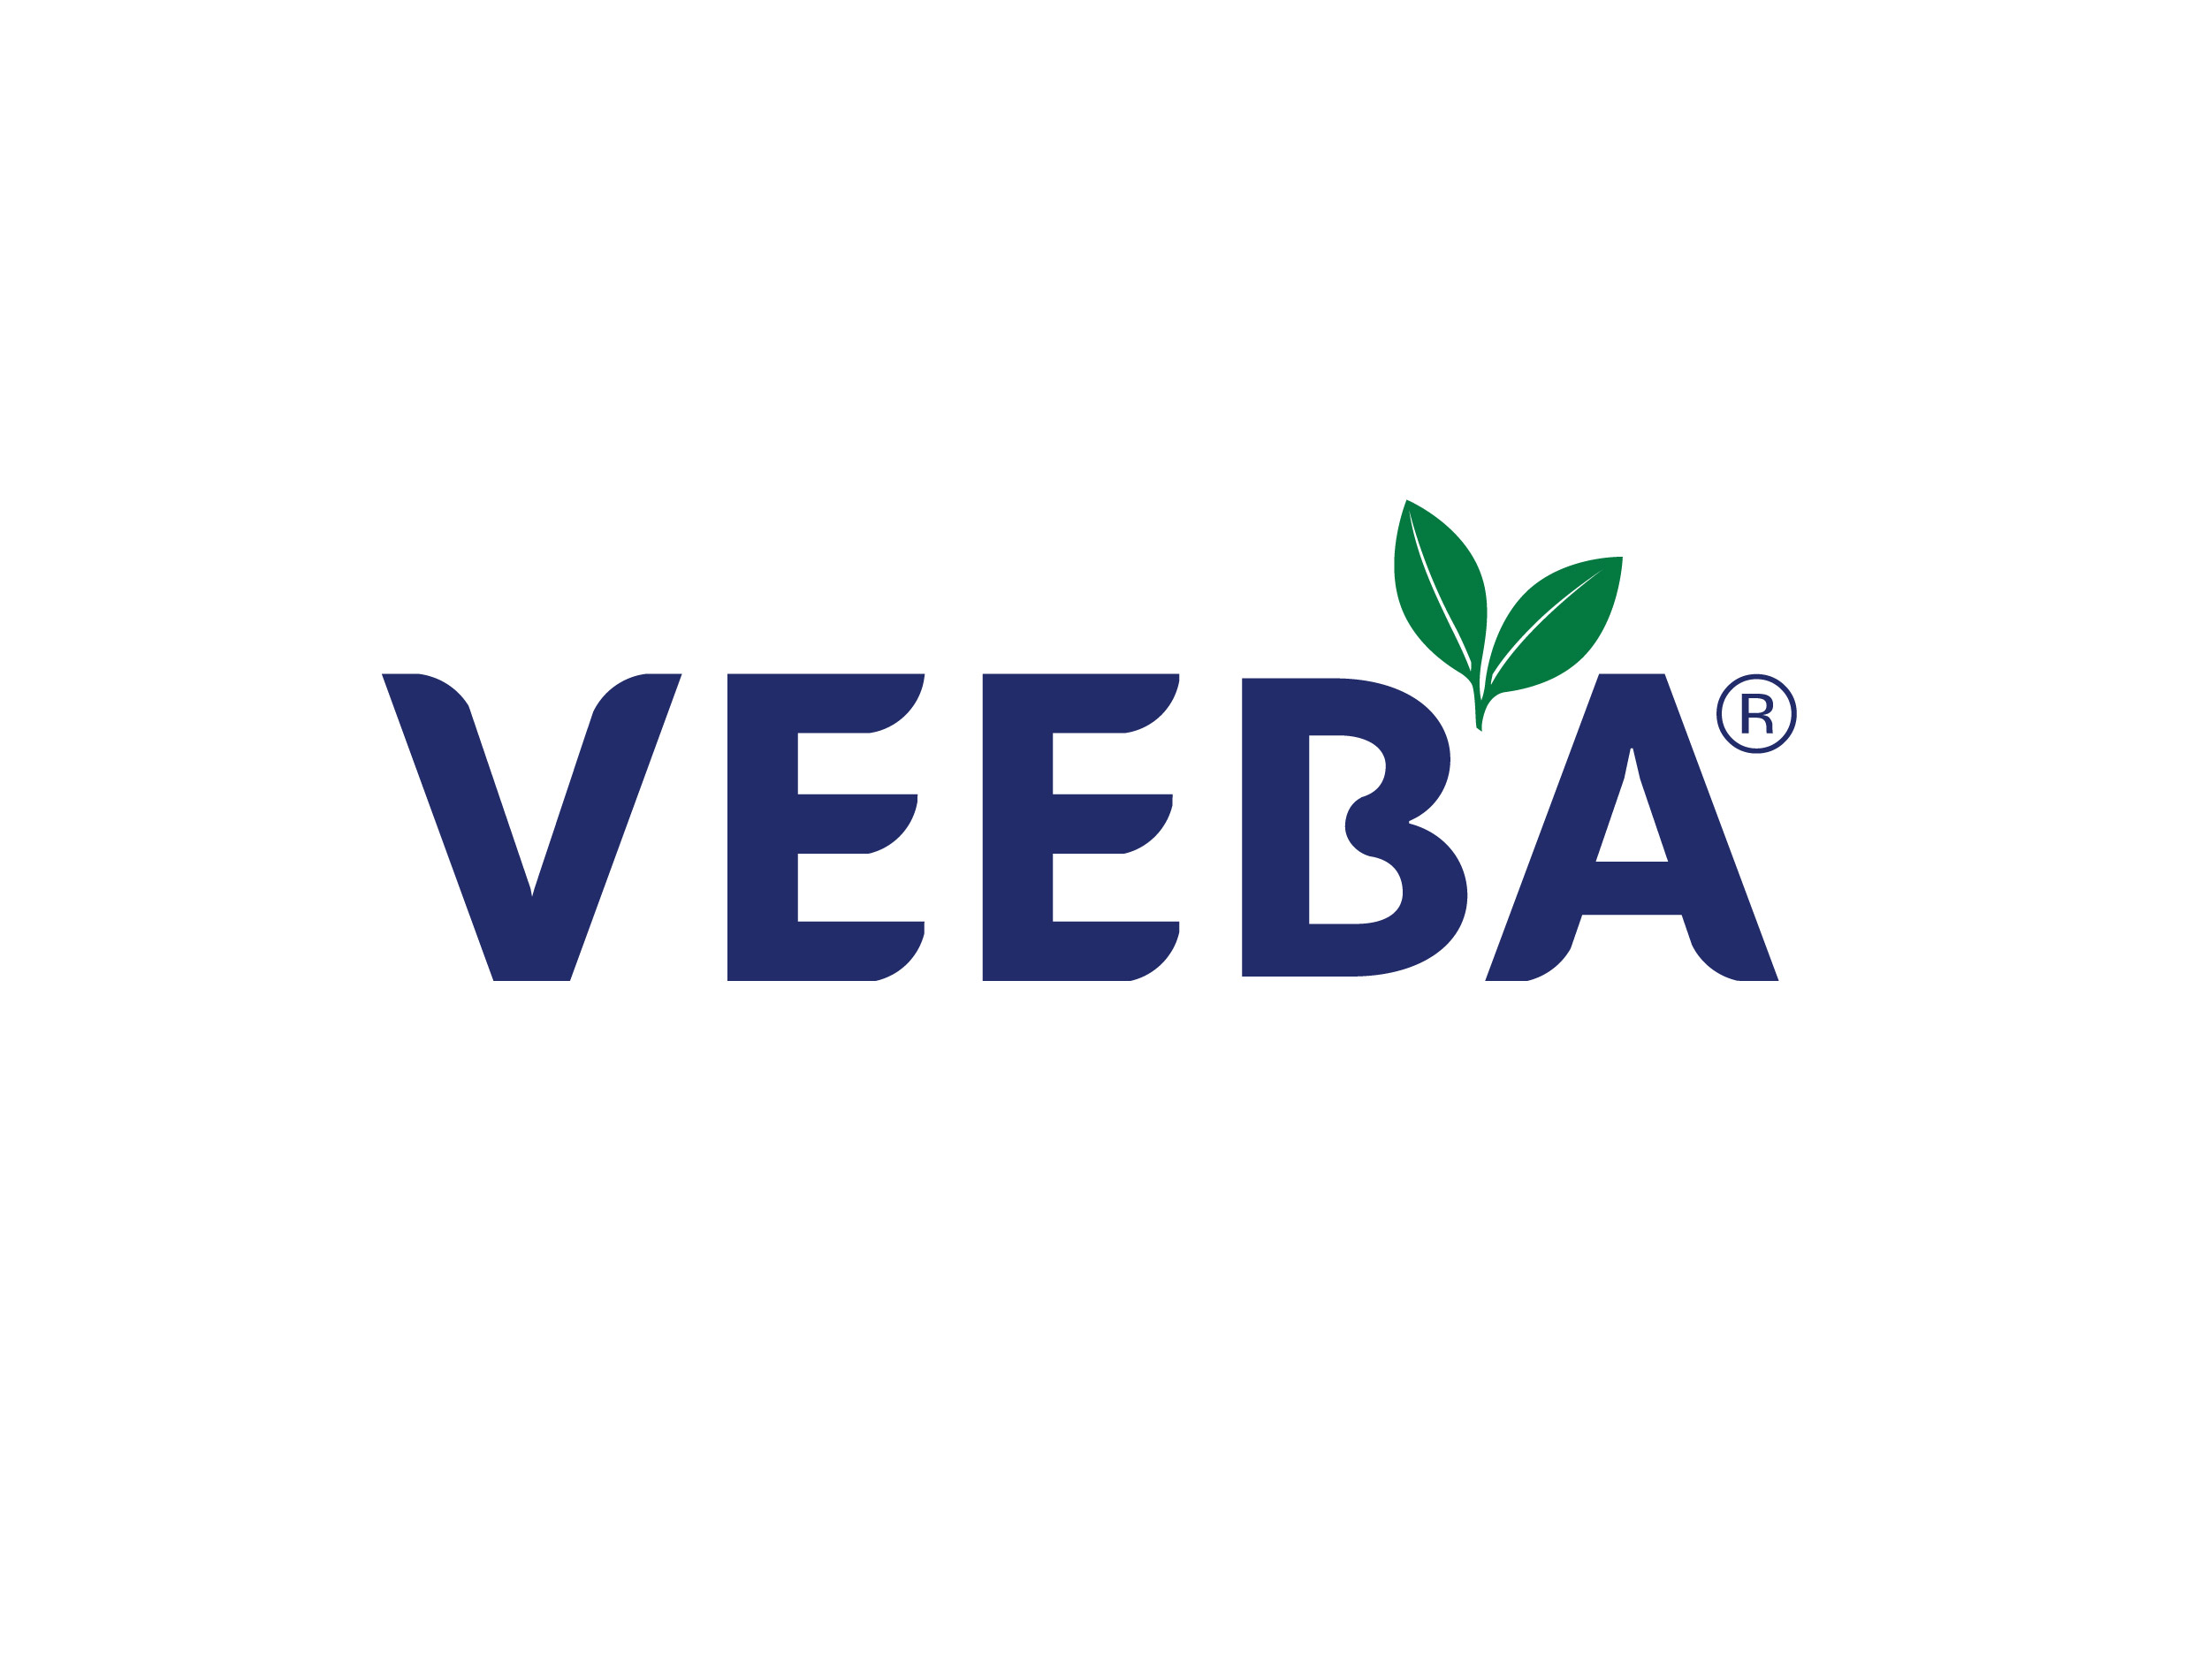 Veeba is one of the leading Condiments & Sauce company in India with strong focus on Quality, Innovation and ‘Better for You’ products. We offer the fastest growing range of dips, sauces and dressings, bringing authentic flavours from across the world into our homes, and lives. 